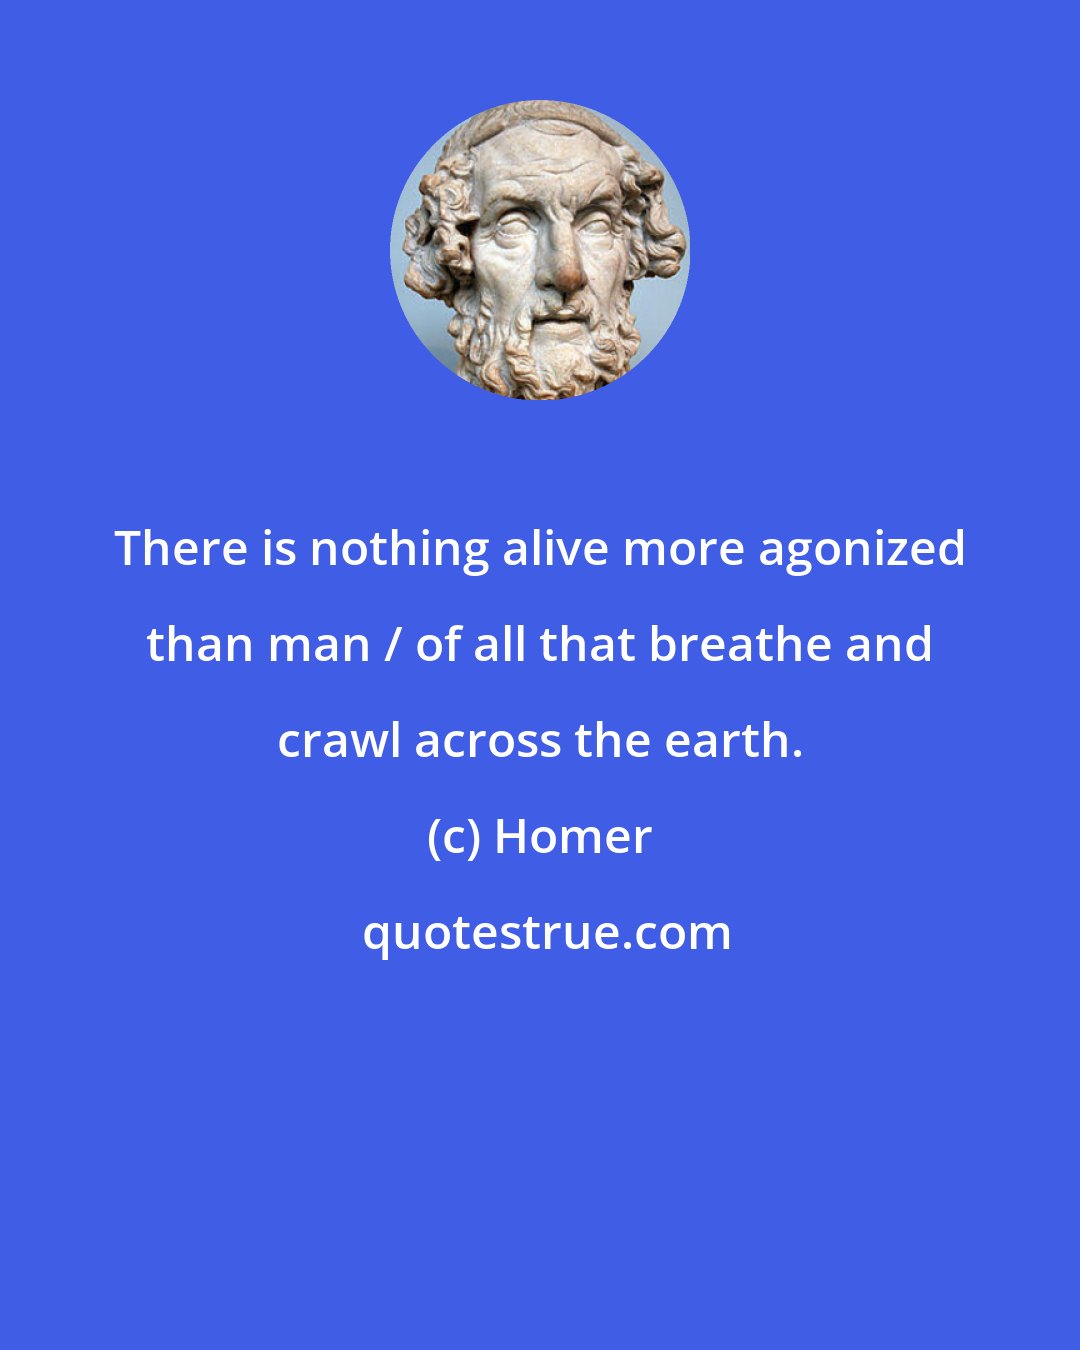 Homer: There is nothing alive more agonized than man / of all that breathe and crawl across the earth.